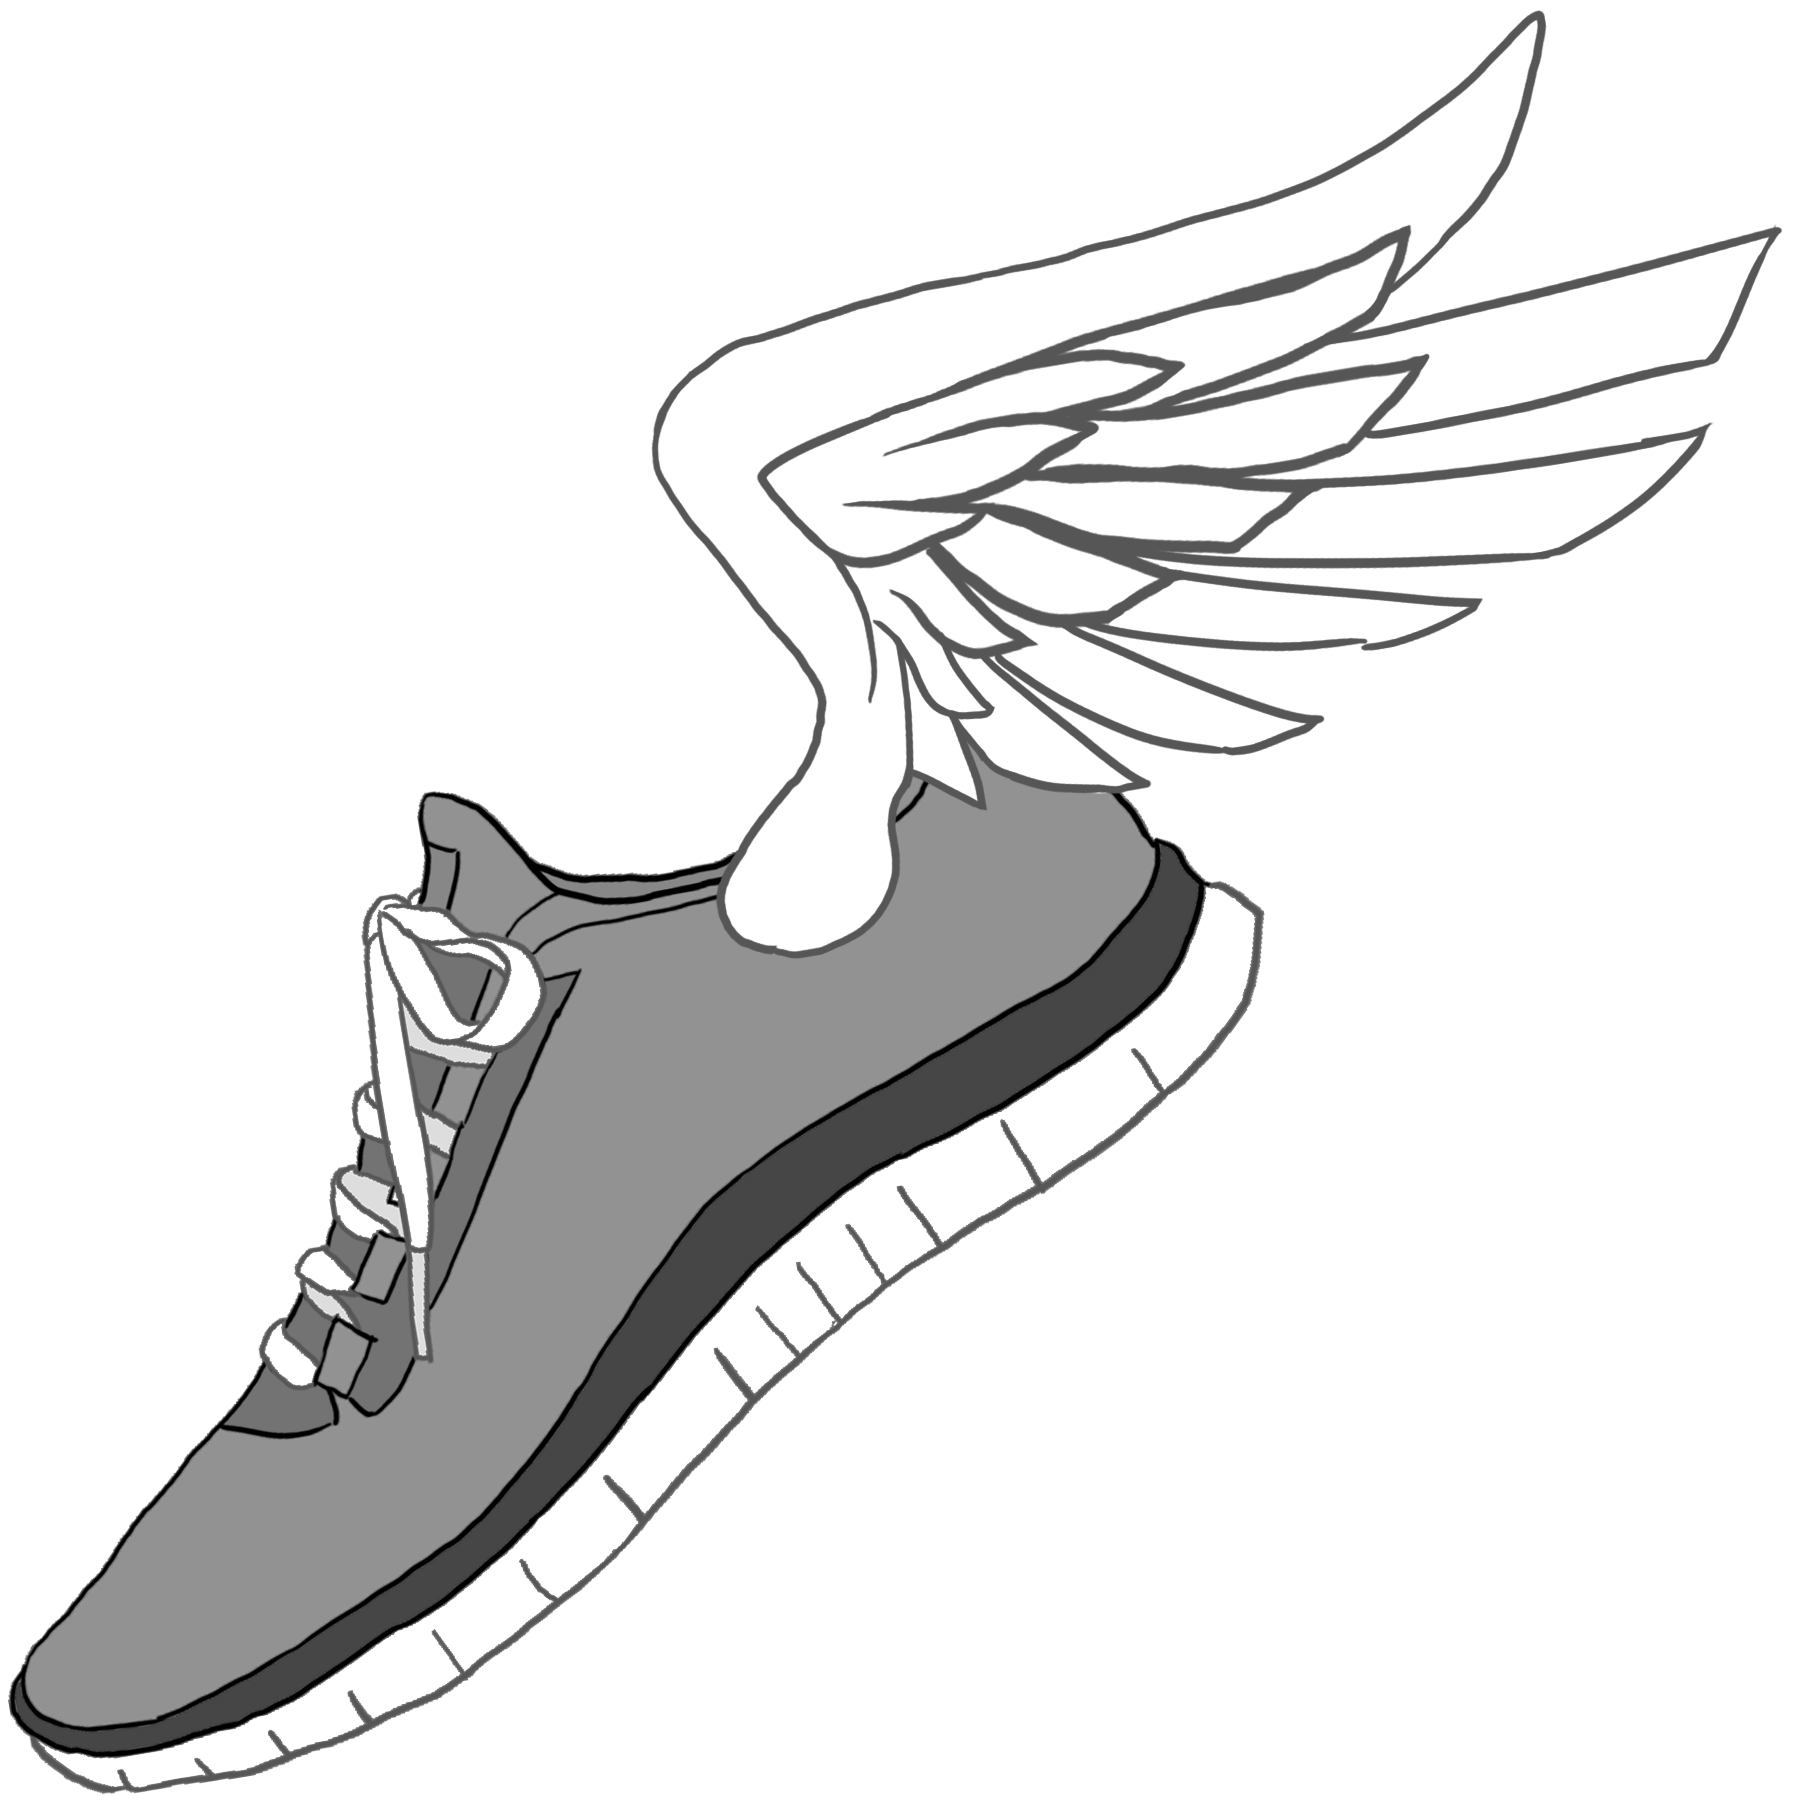 track shoe clipart free vector - photo #49